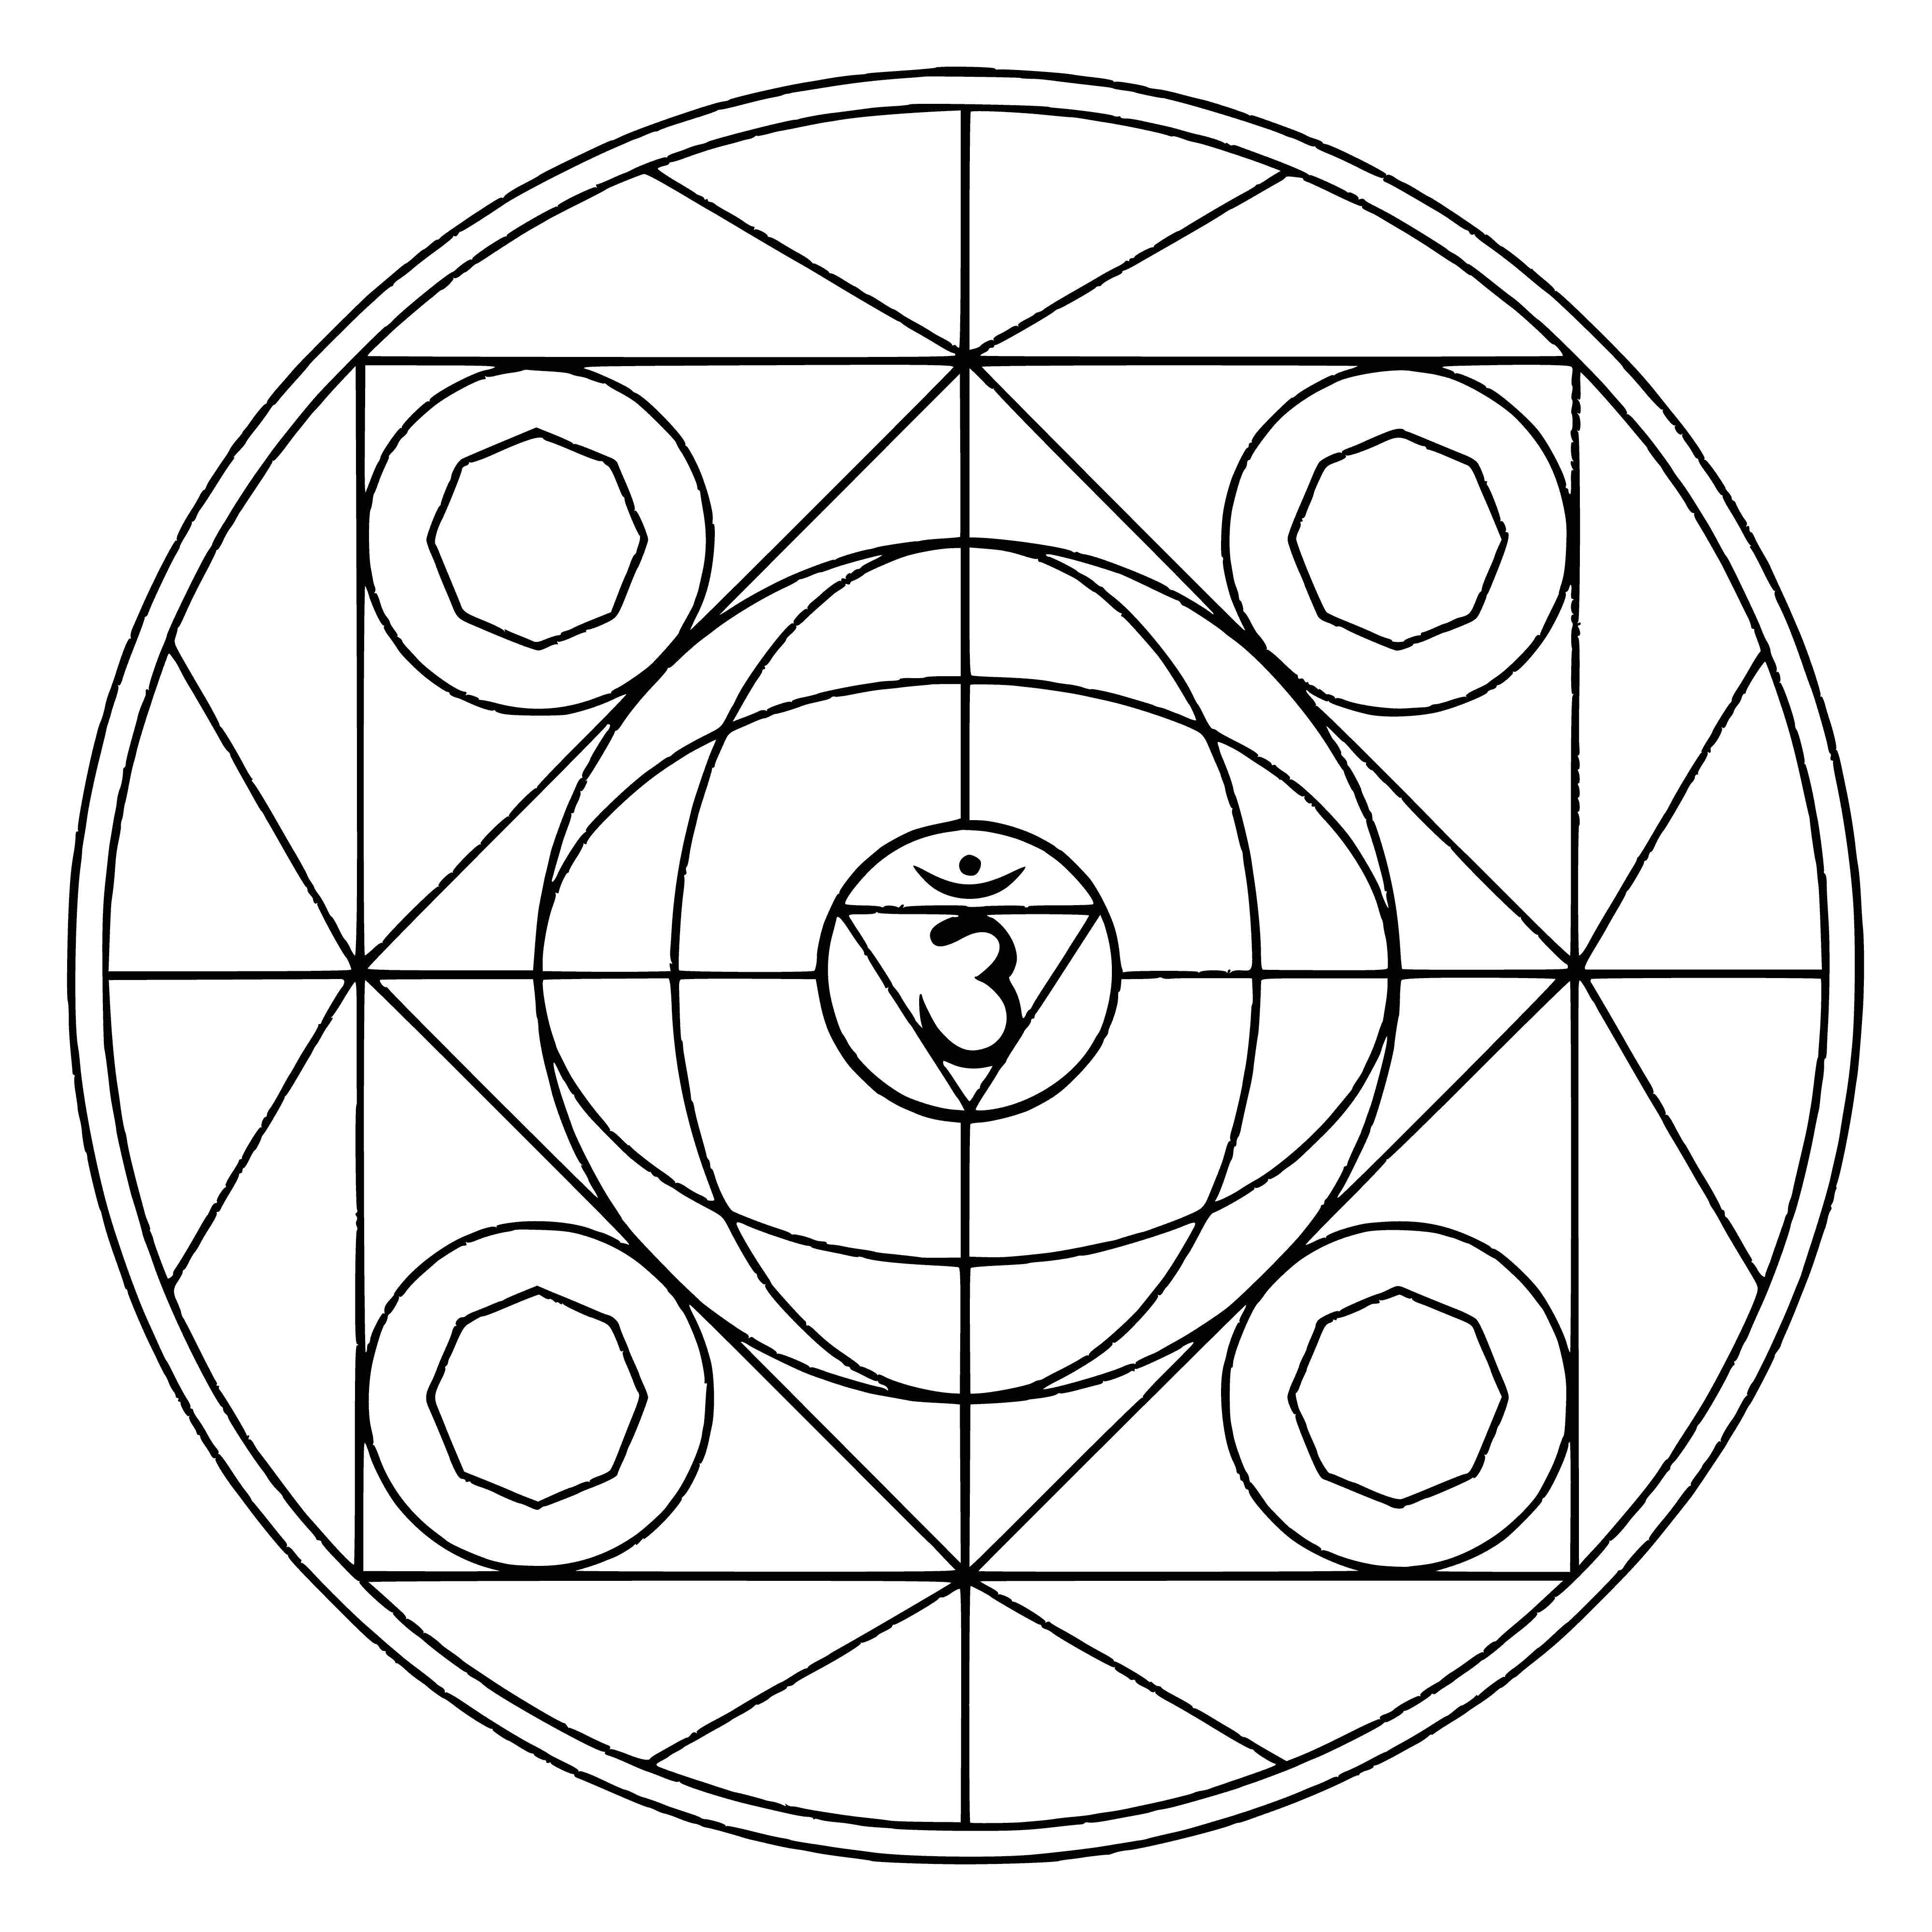 coloring page: Create your own unique mandala with 8 different colors! Have fun and let creativity flow - no rules or right/wrong way.